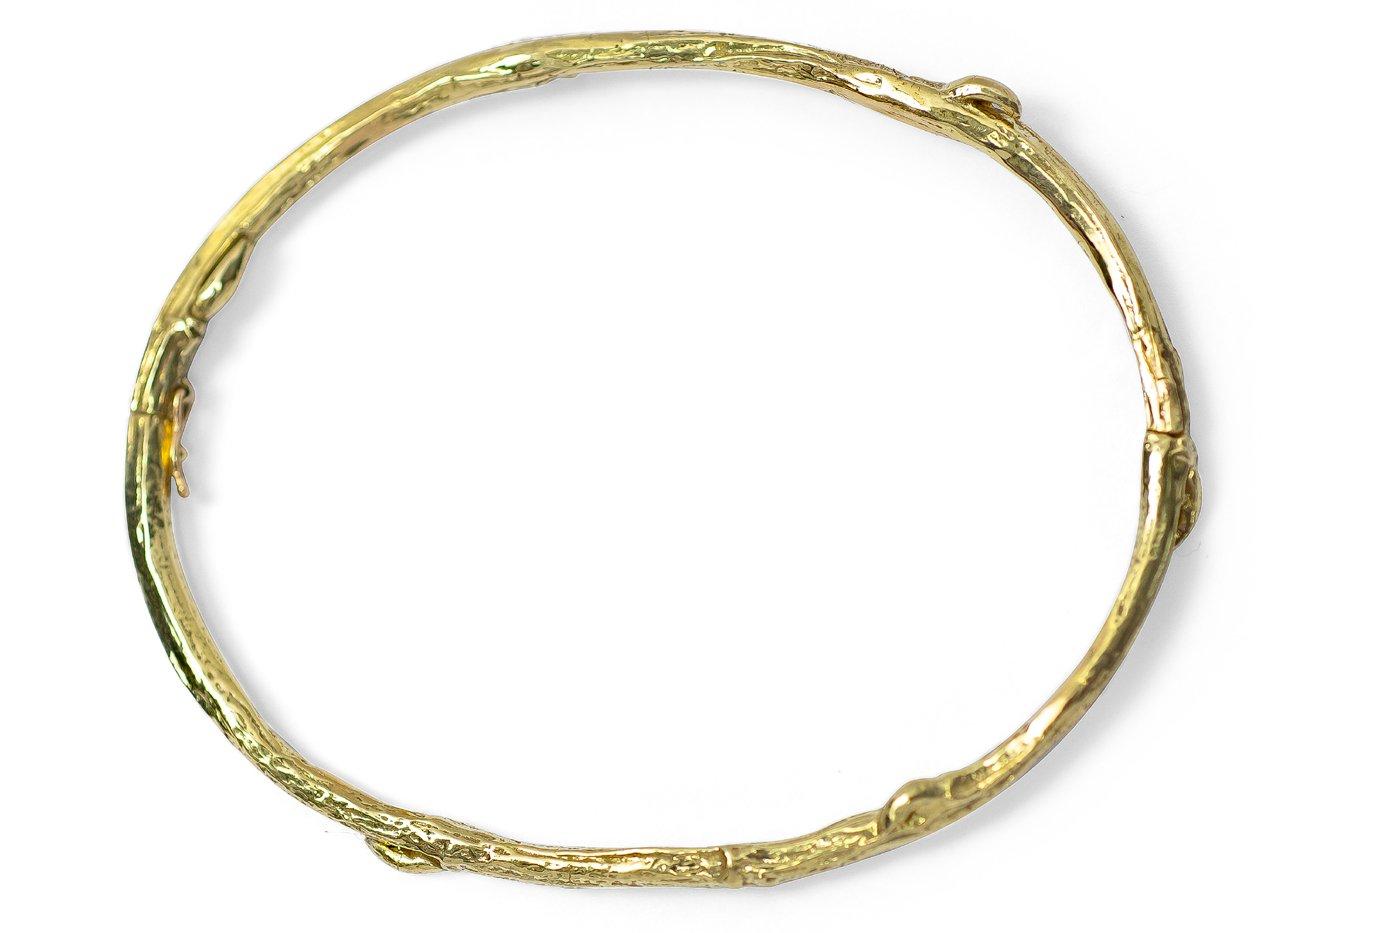 You'll remember to flex and bend with life's winds every time you glance at this golden twig wrapped gently around your wrist. A perfect everyday piece, this snug-fitting 18k gold bangle has a hinge and clasp closure.

GS18kTwigBr- Tight fitting